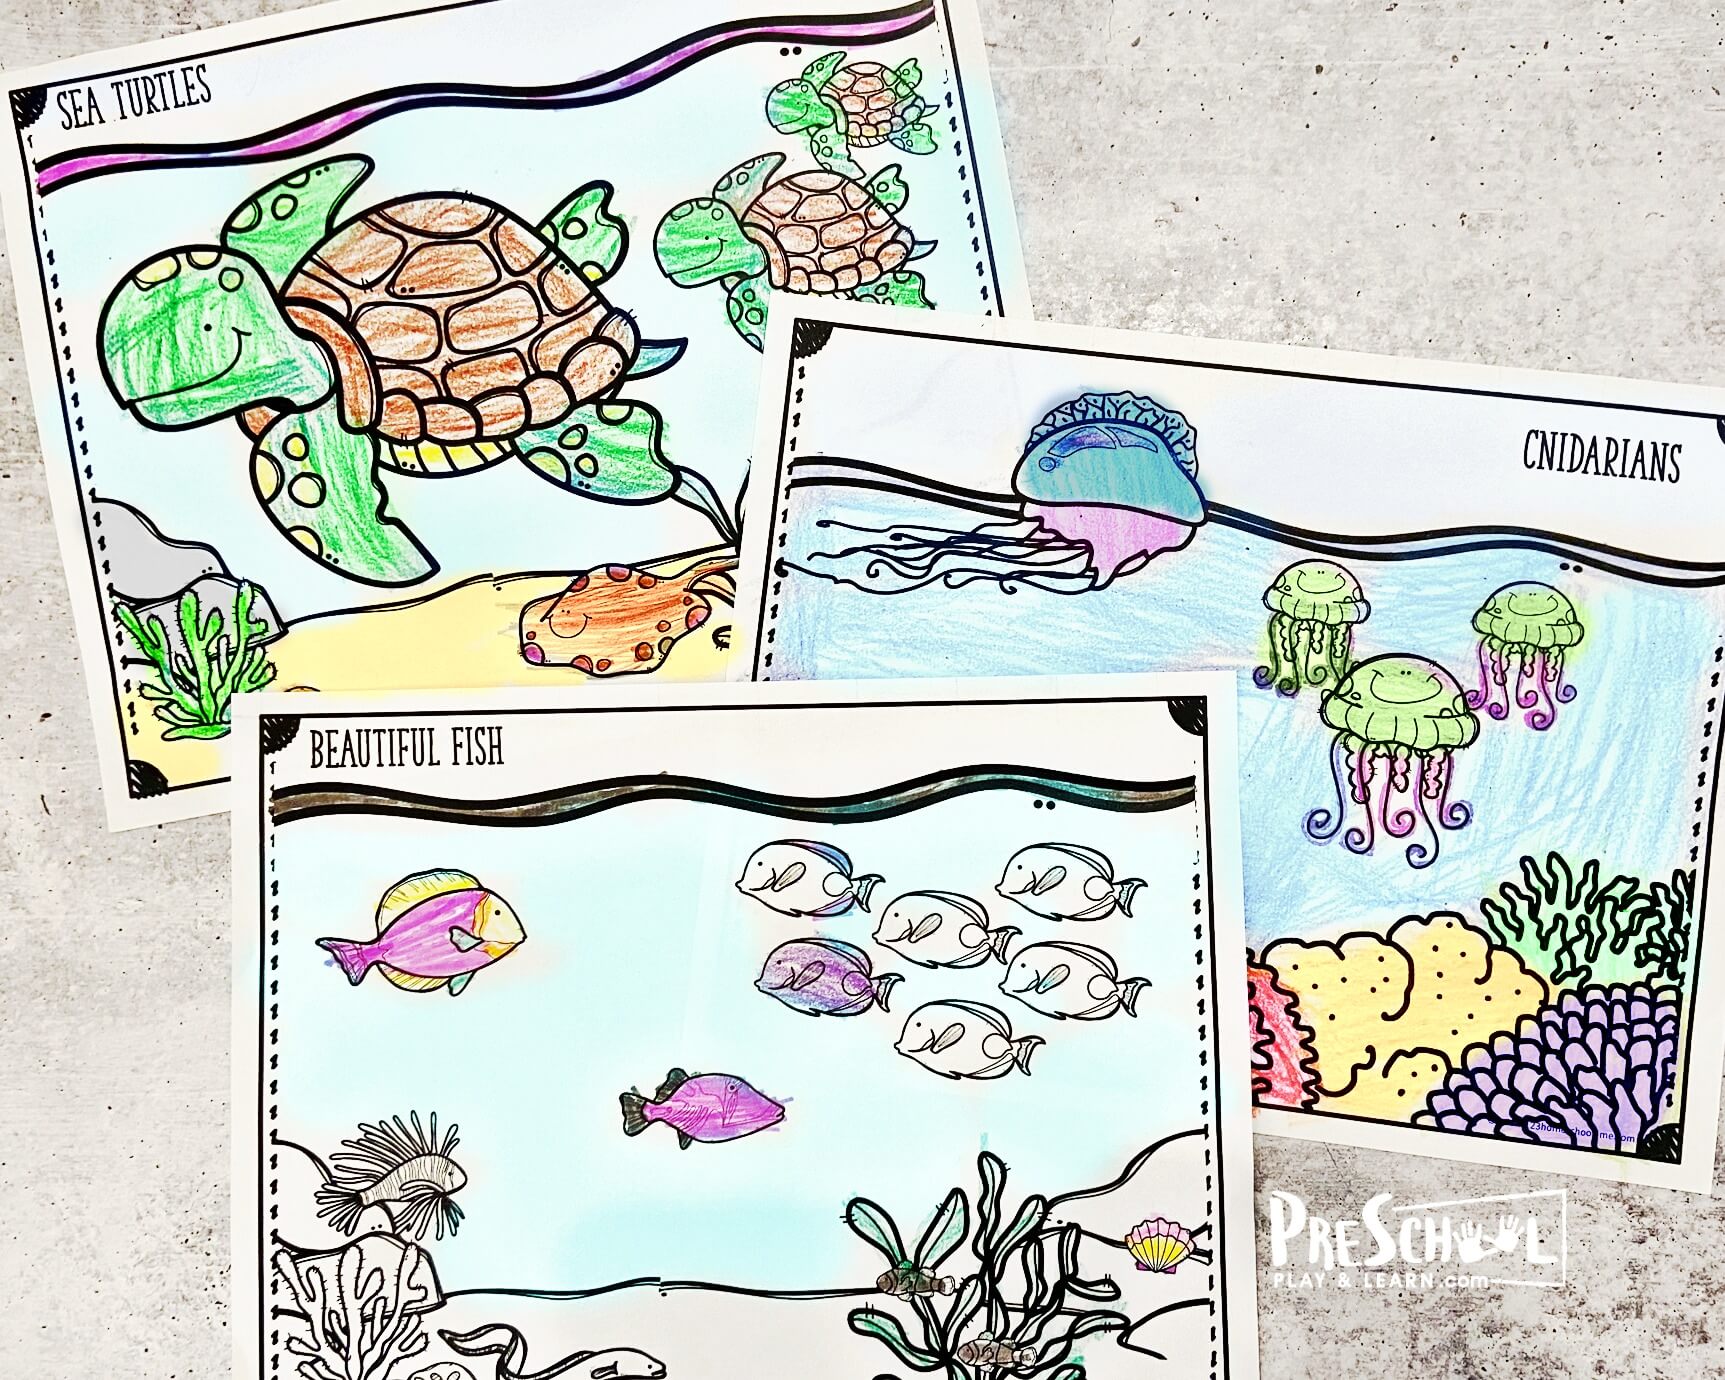 Larn To Draw Sea Creatures Coloring Book For Kids: Super Fun